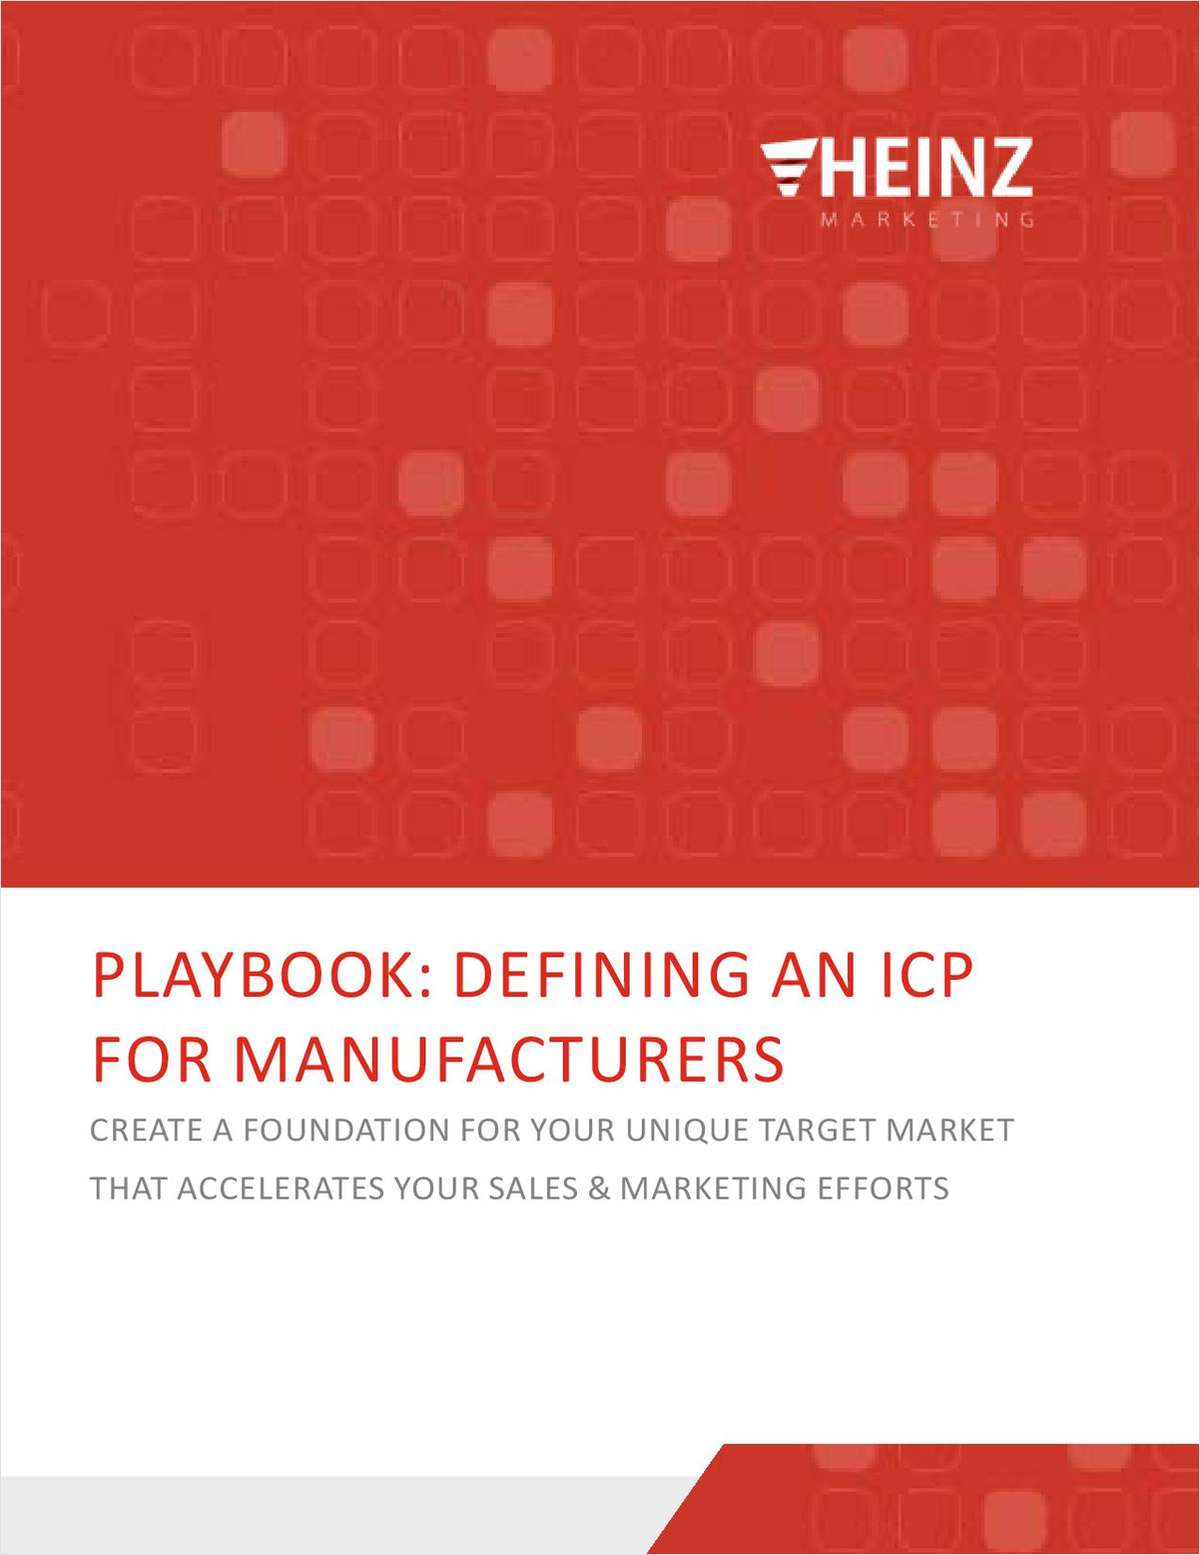 Playbook: Defining an ICP for Manufacturers